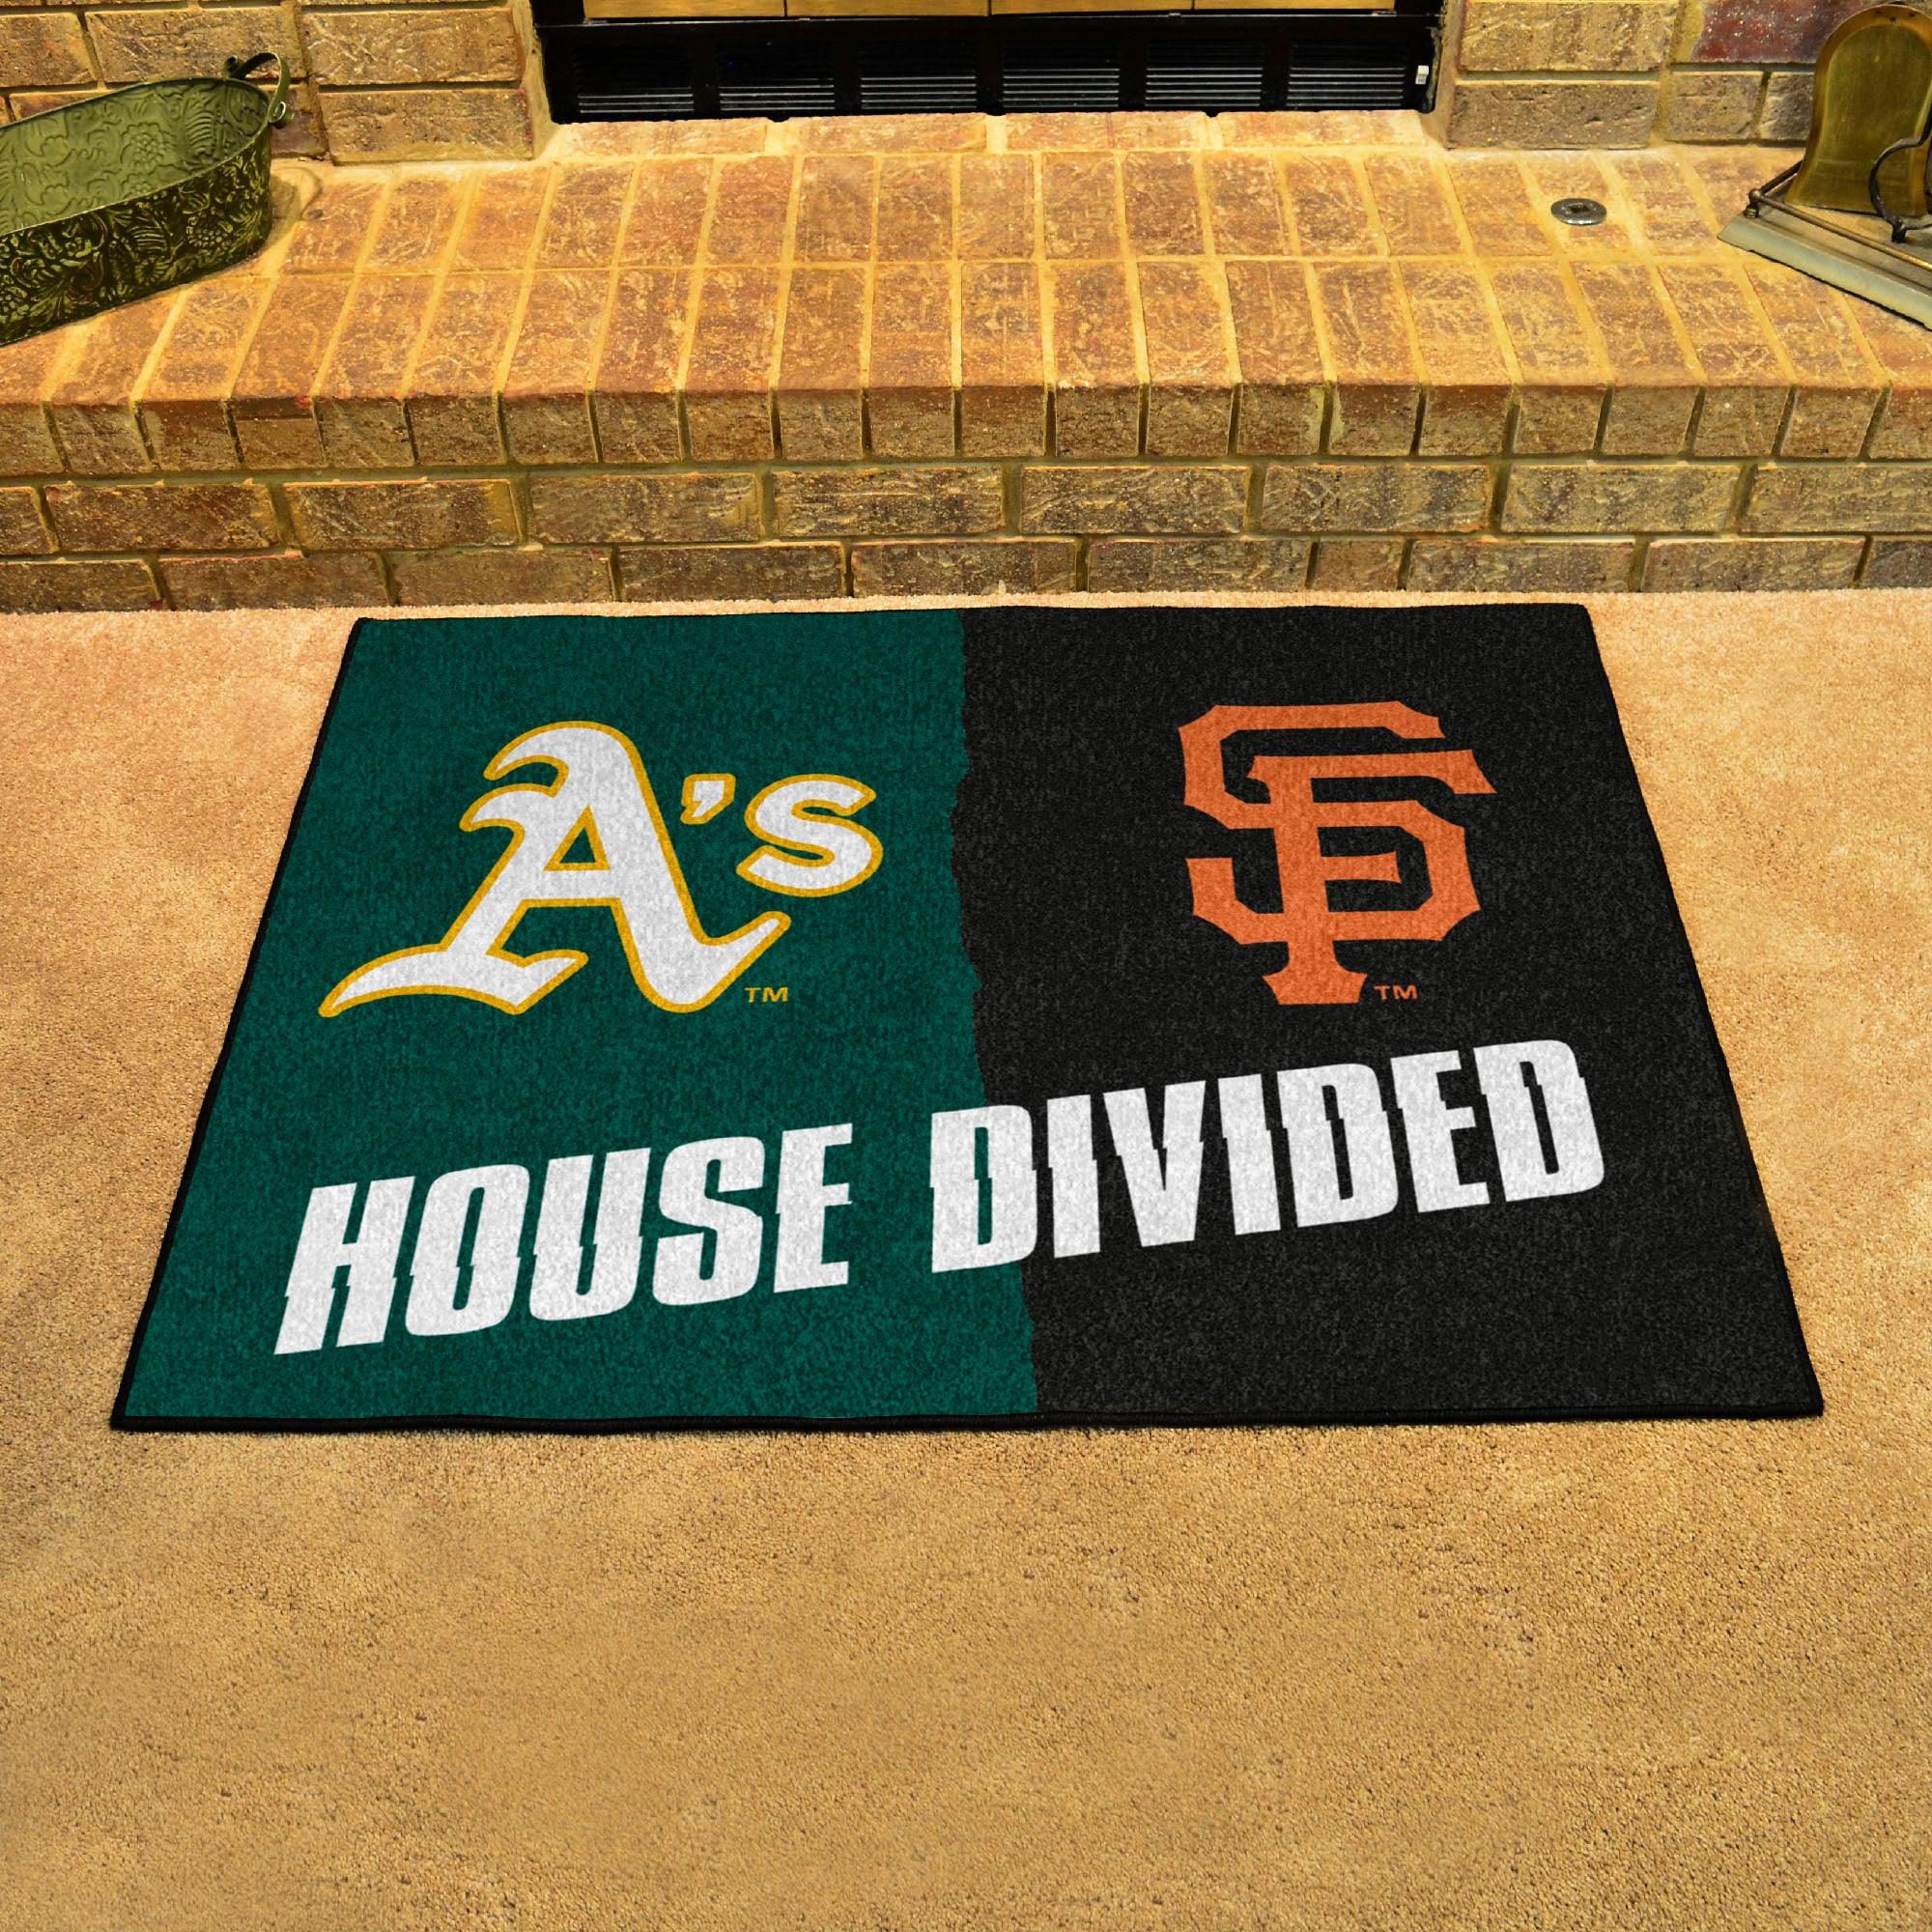 FANMATS, MLB House Divided - Athletics / Giants House Divided Rug